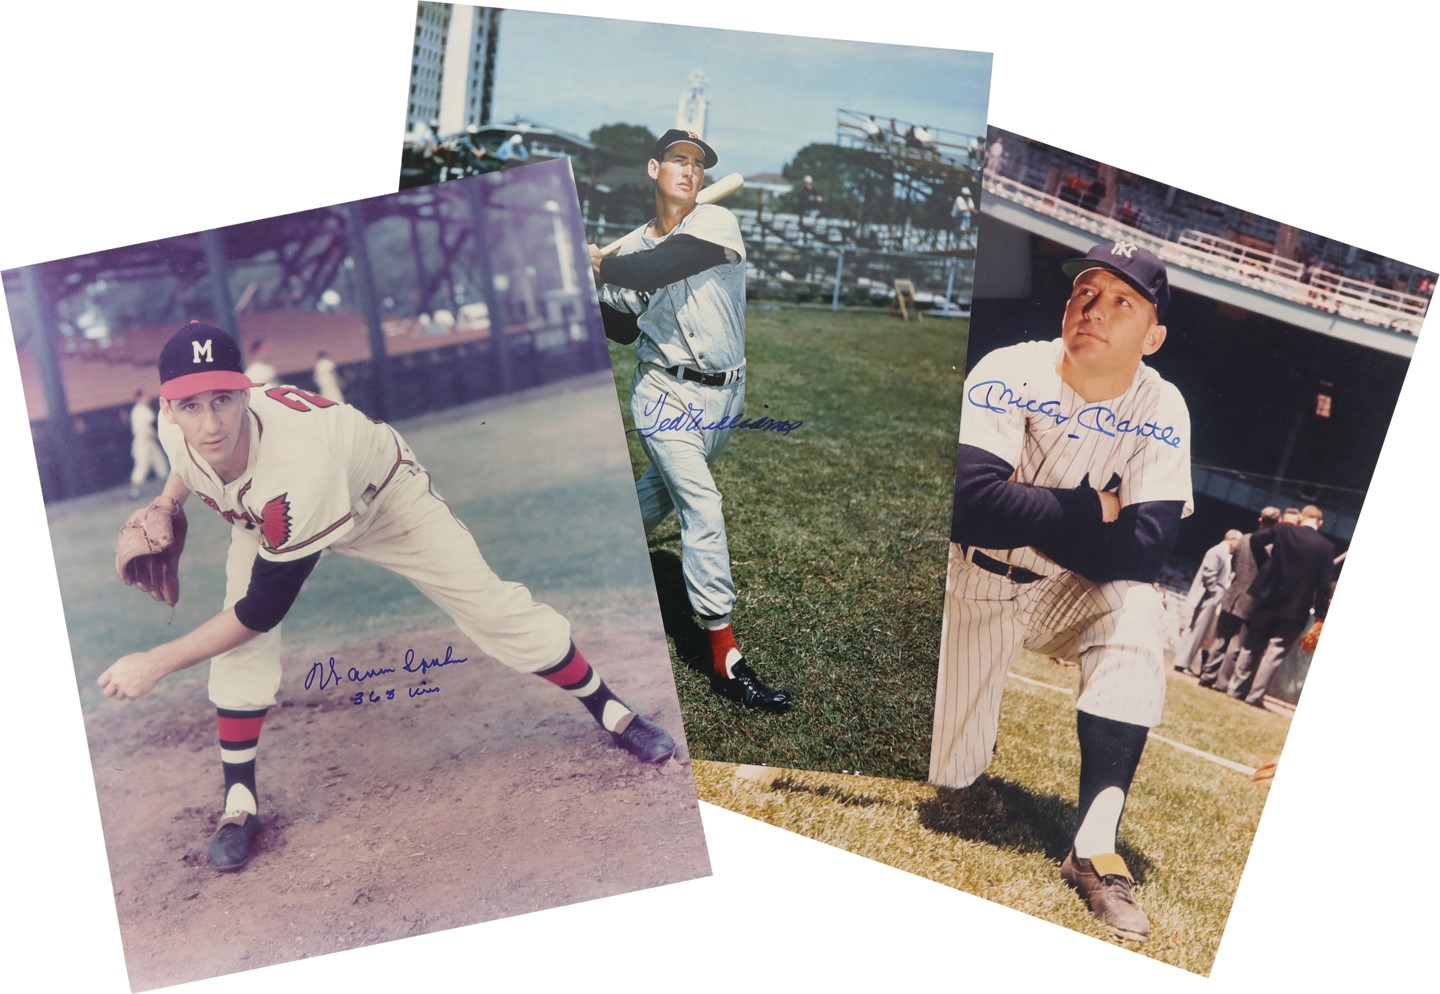 - Hall of Fame 16x20" Signed Photograph Collection - Mantle, T. Williams, and Spahn (PSA)